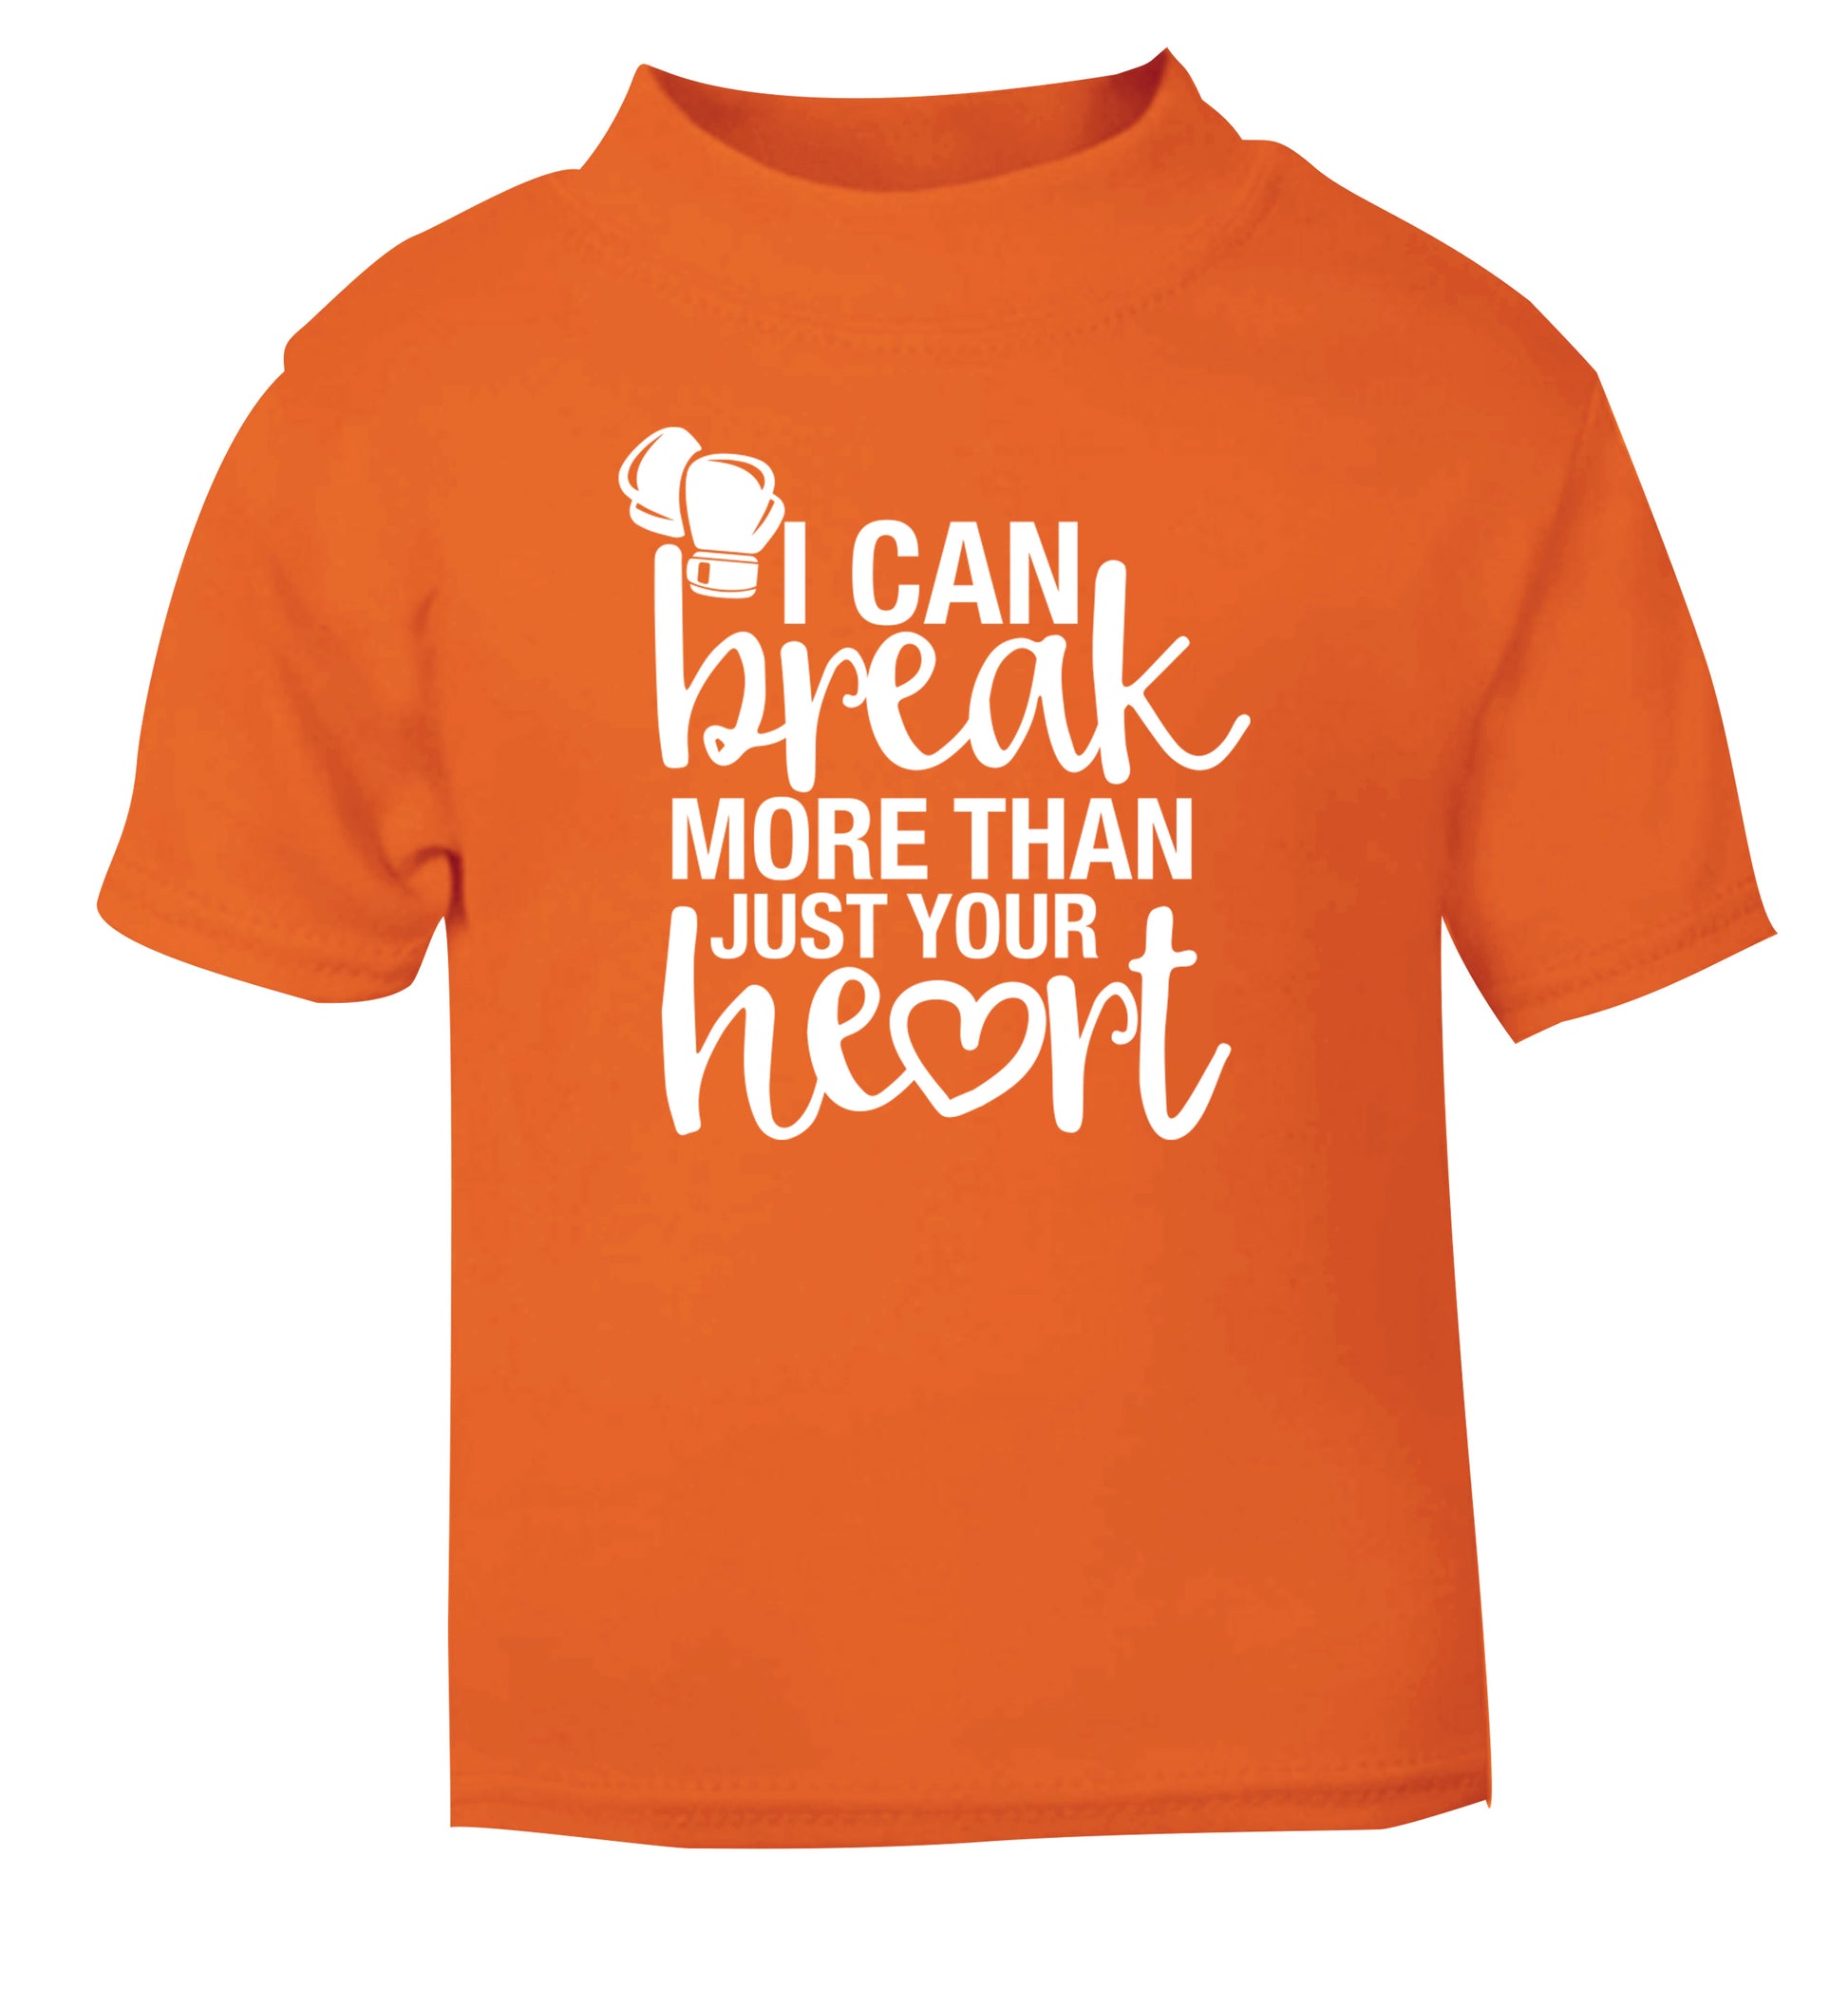 I can break more than just your heart orange Baby Toddler Tshirt 2 Years